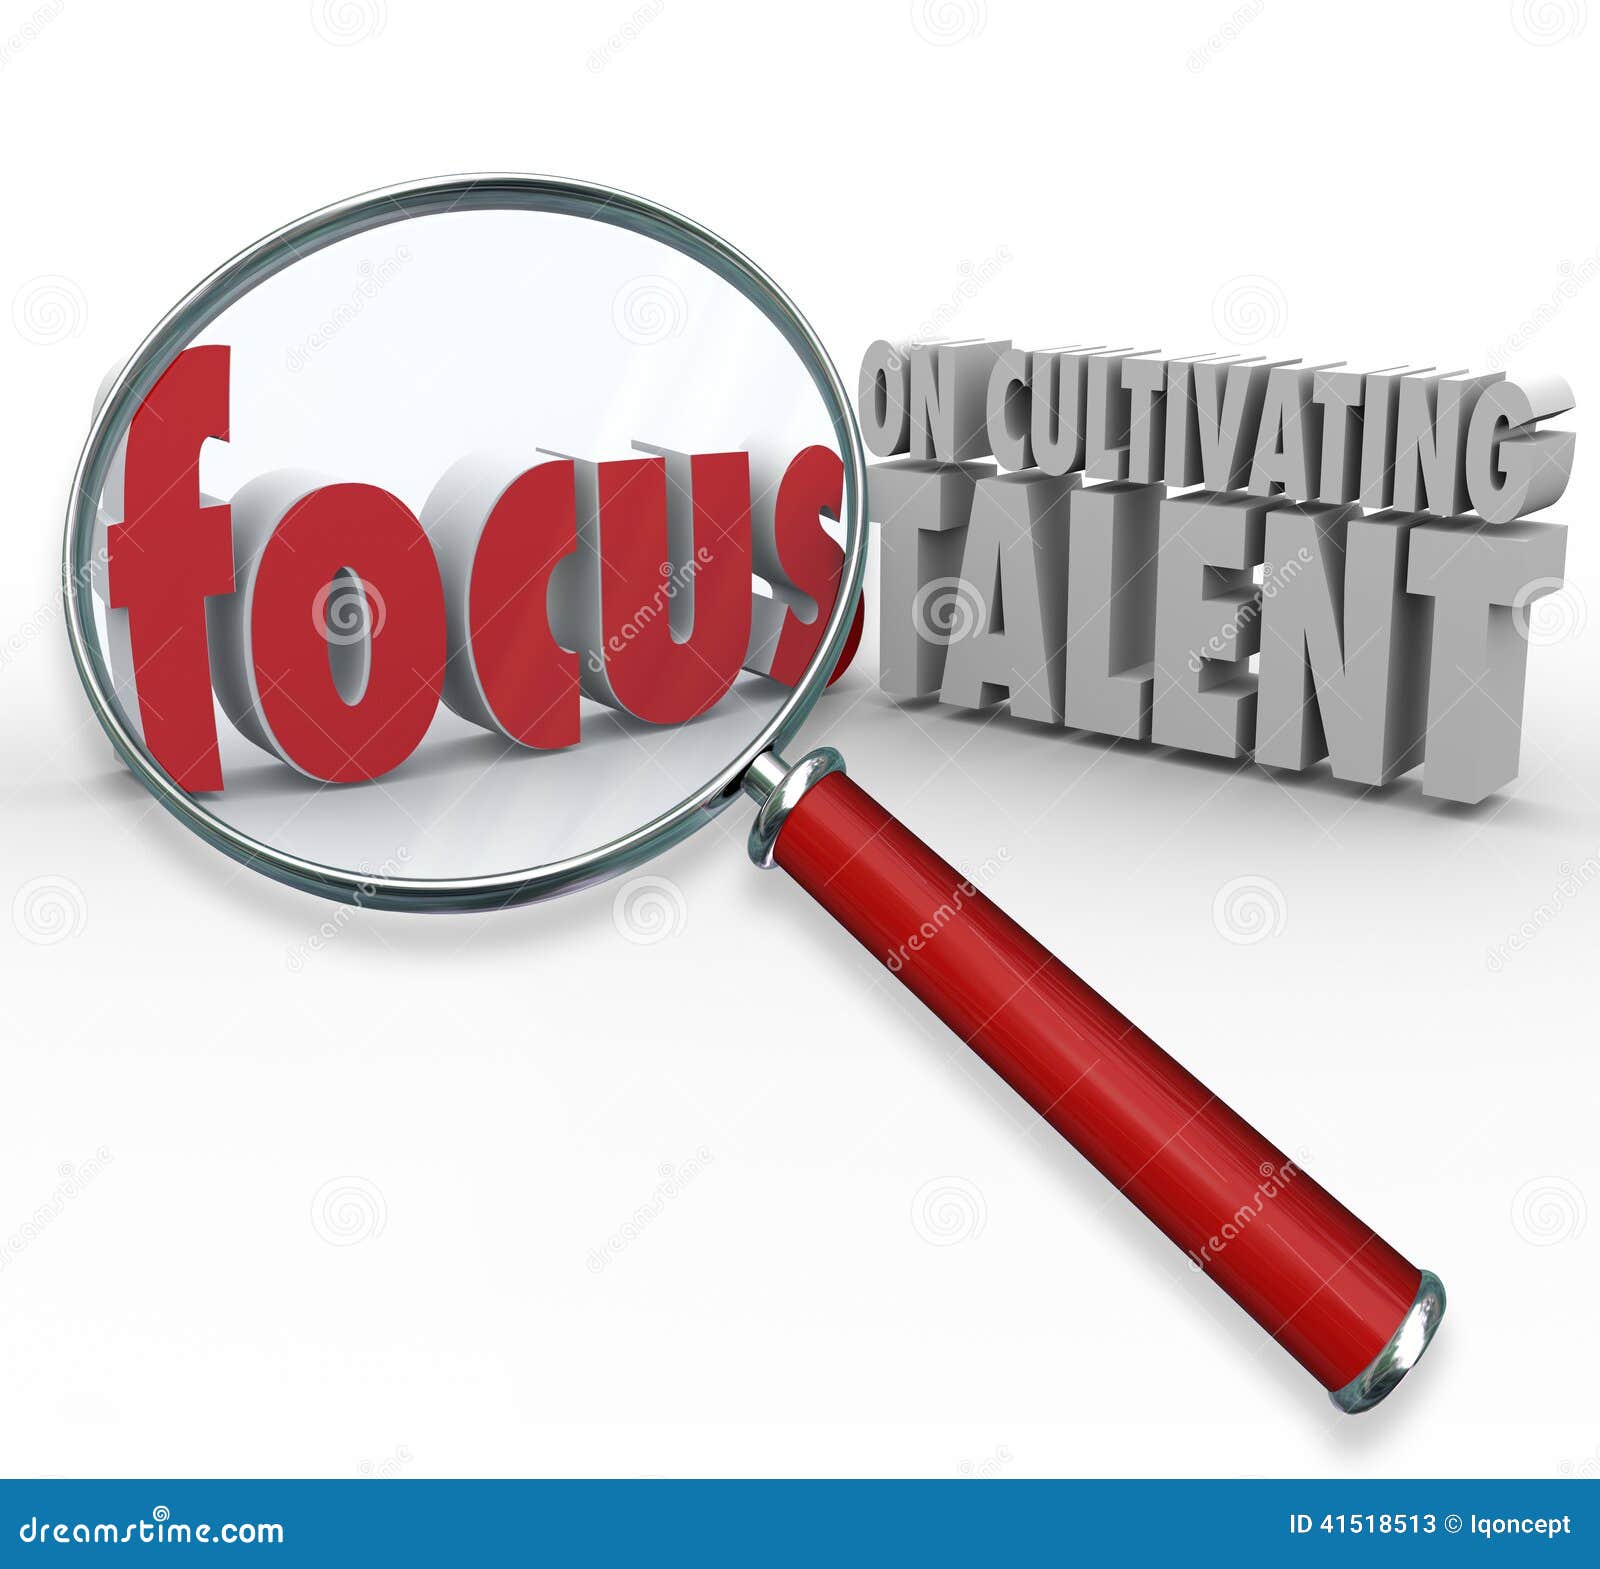 focus on cultivating talent words magnifying glass finding employees